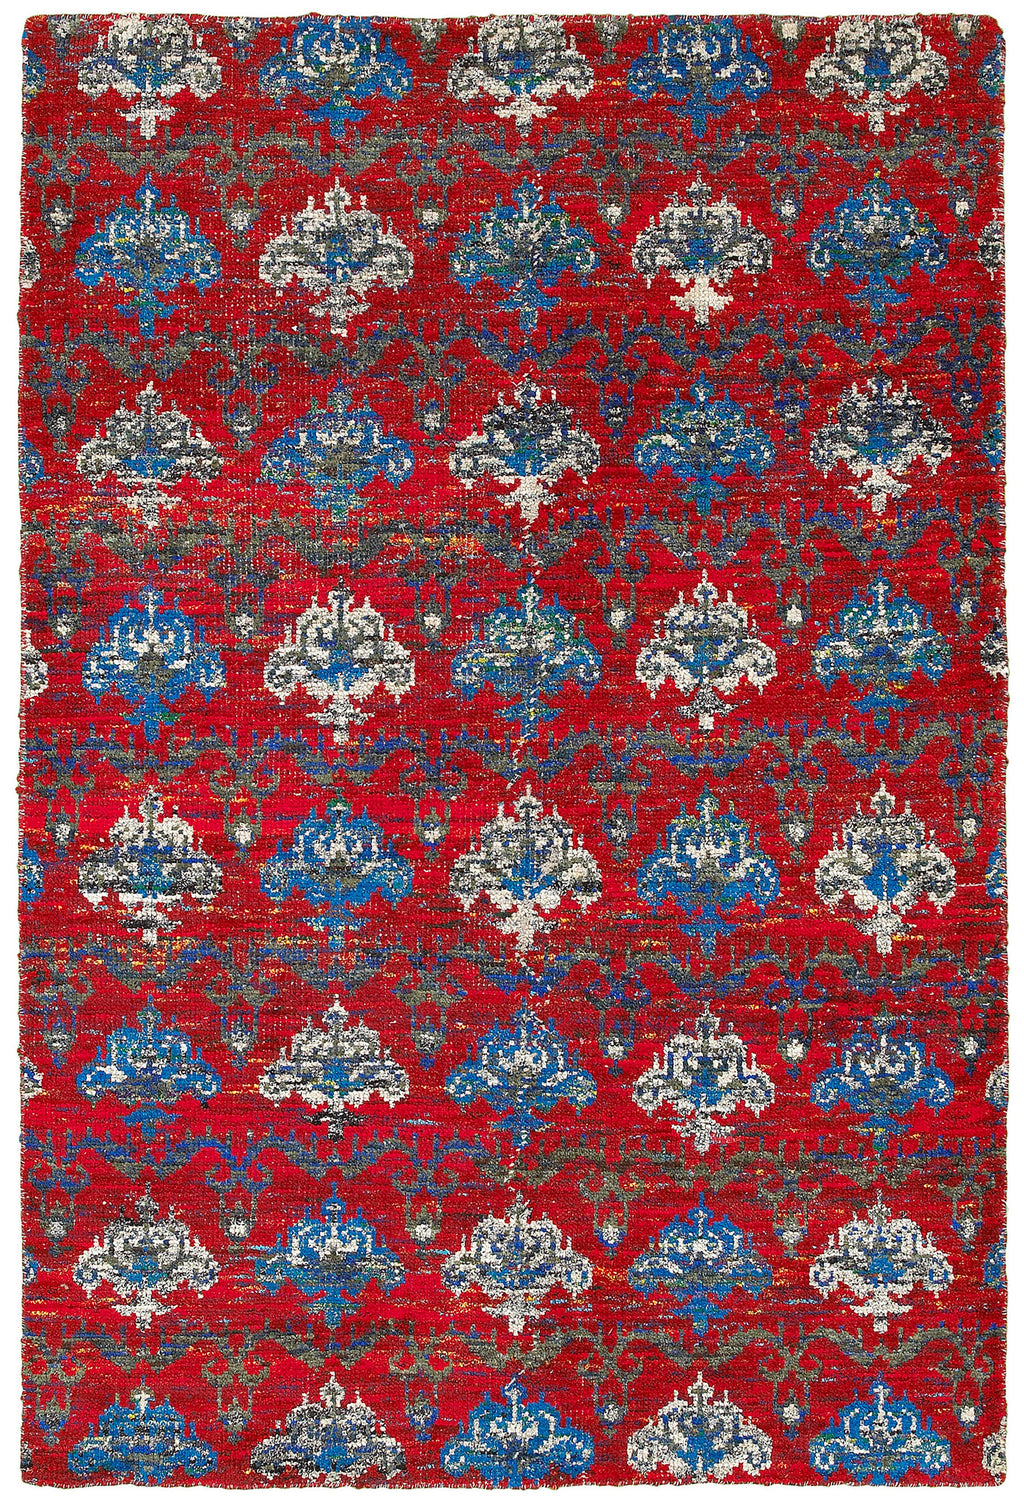 LR Resources Nisha 04403 Red Multi Hand Knotted Area Rug 4' X 6'